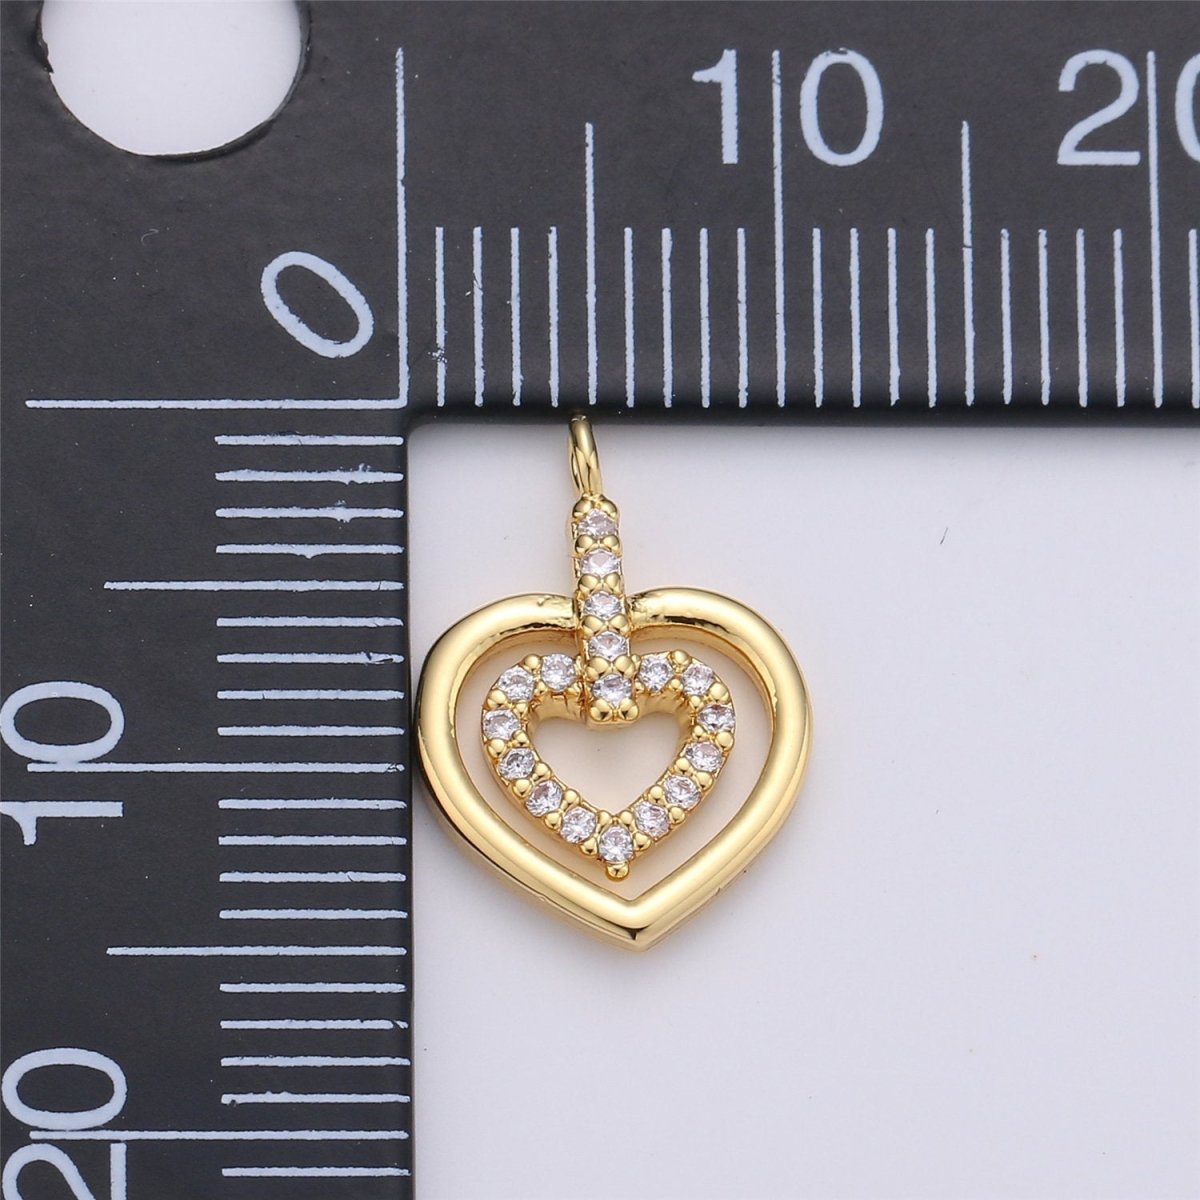 24k Gold Filled Micro Pave CZ Heart Pendant Charm, Heart in Heart Micro Pave CZ Pendant Charm, Gold Filled Pendant, For DIY Jewelry D-009 - DLUXCA